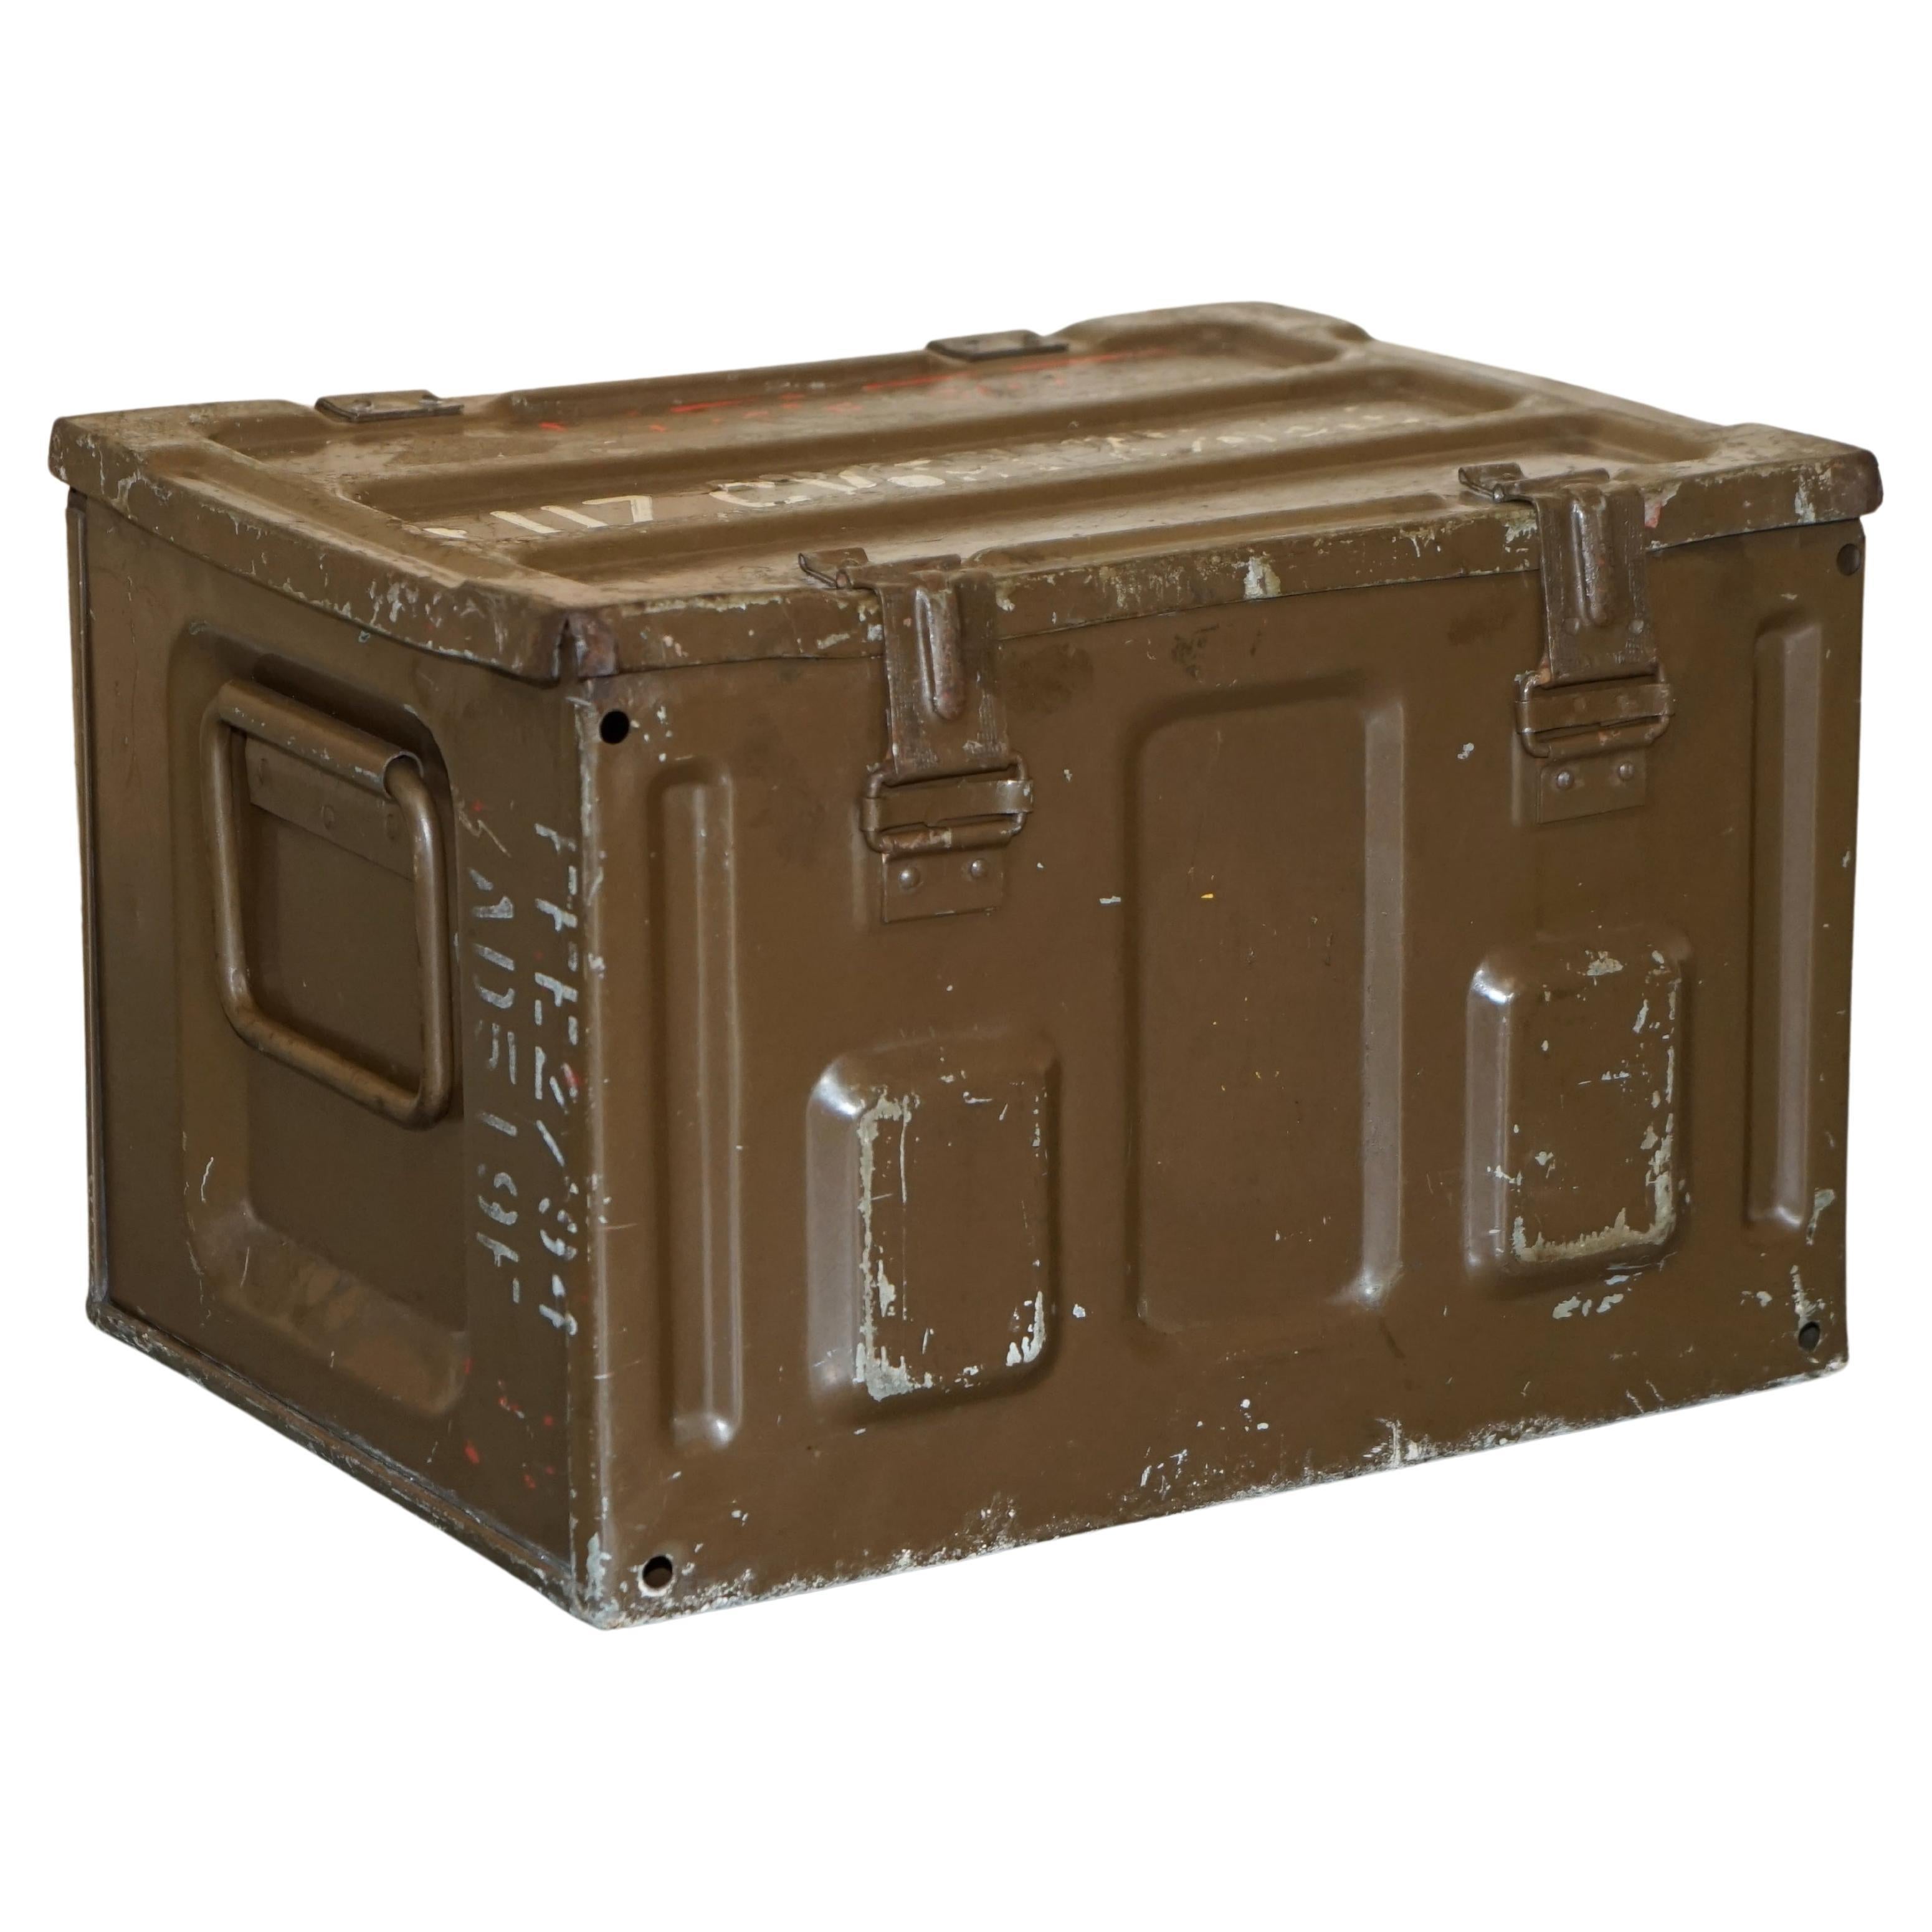 Vintage Military Campaign Used Ammunition Box from Ww2 Stunning Period Patina For Sale